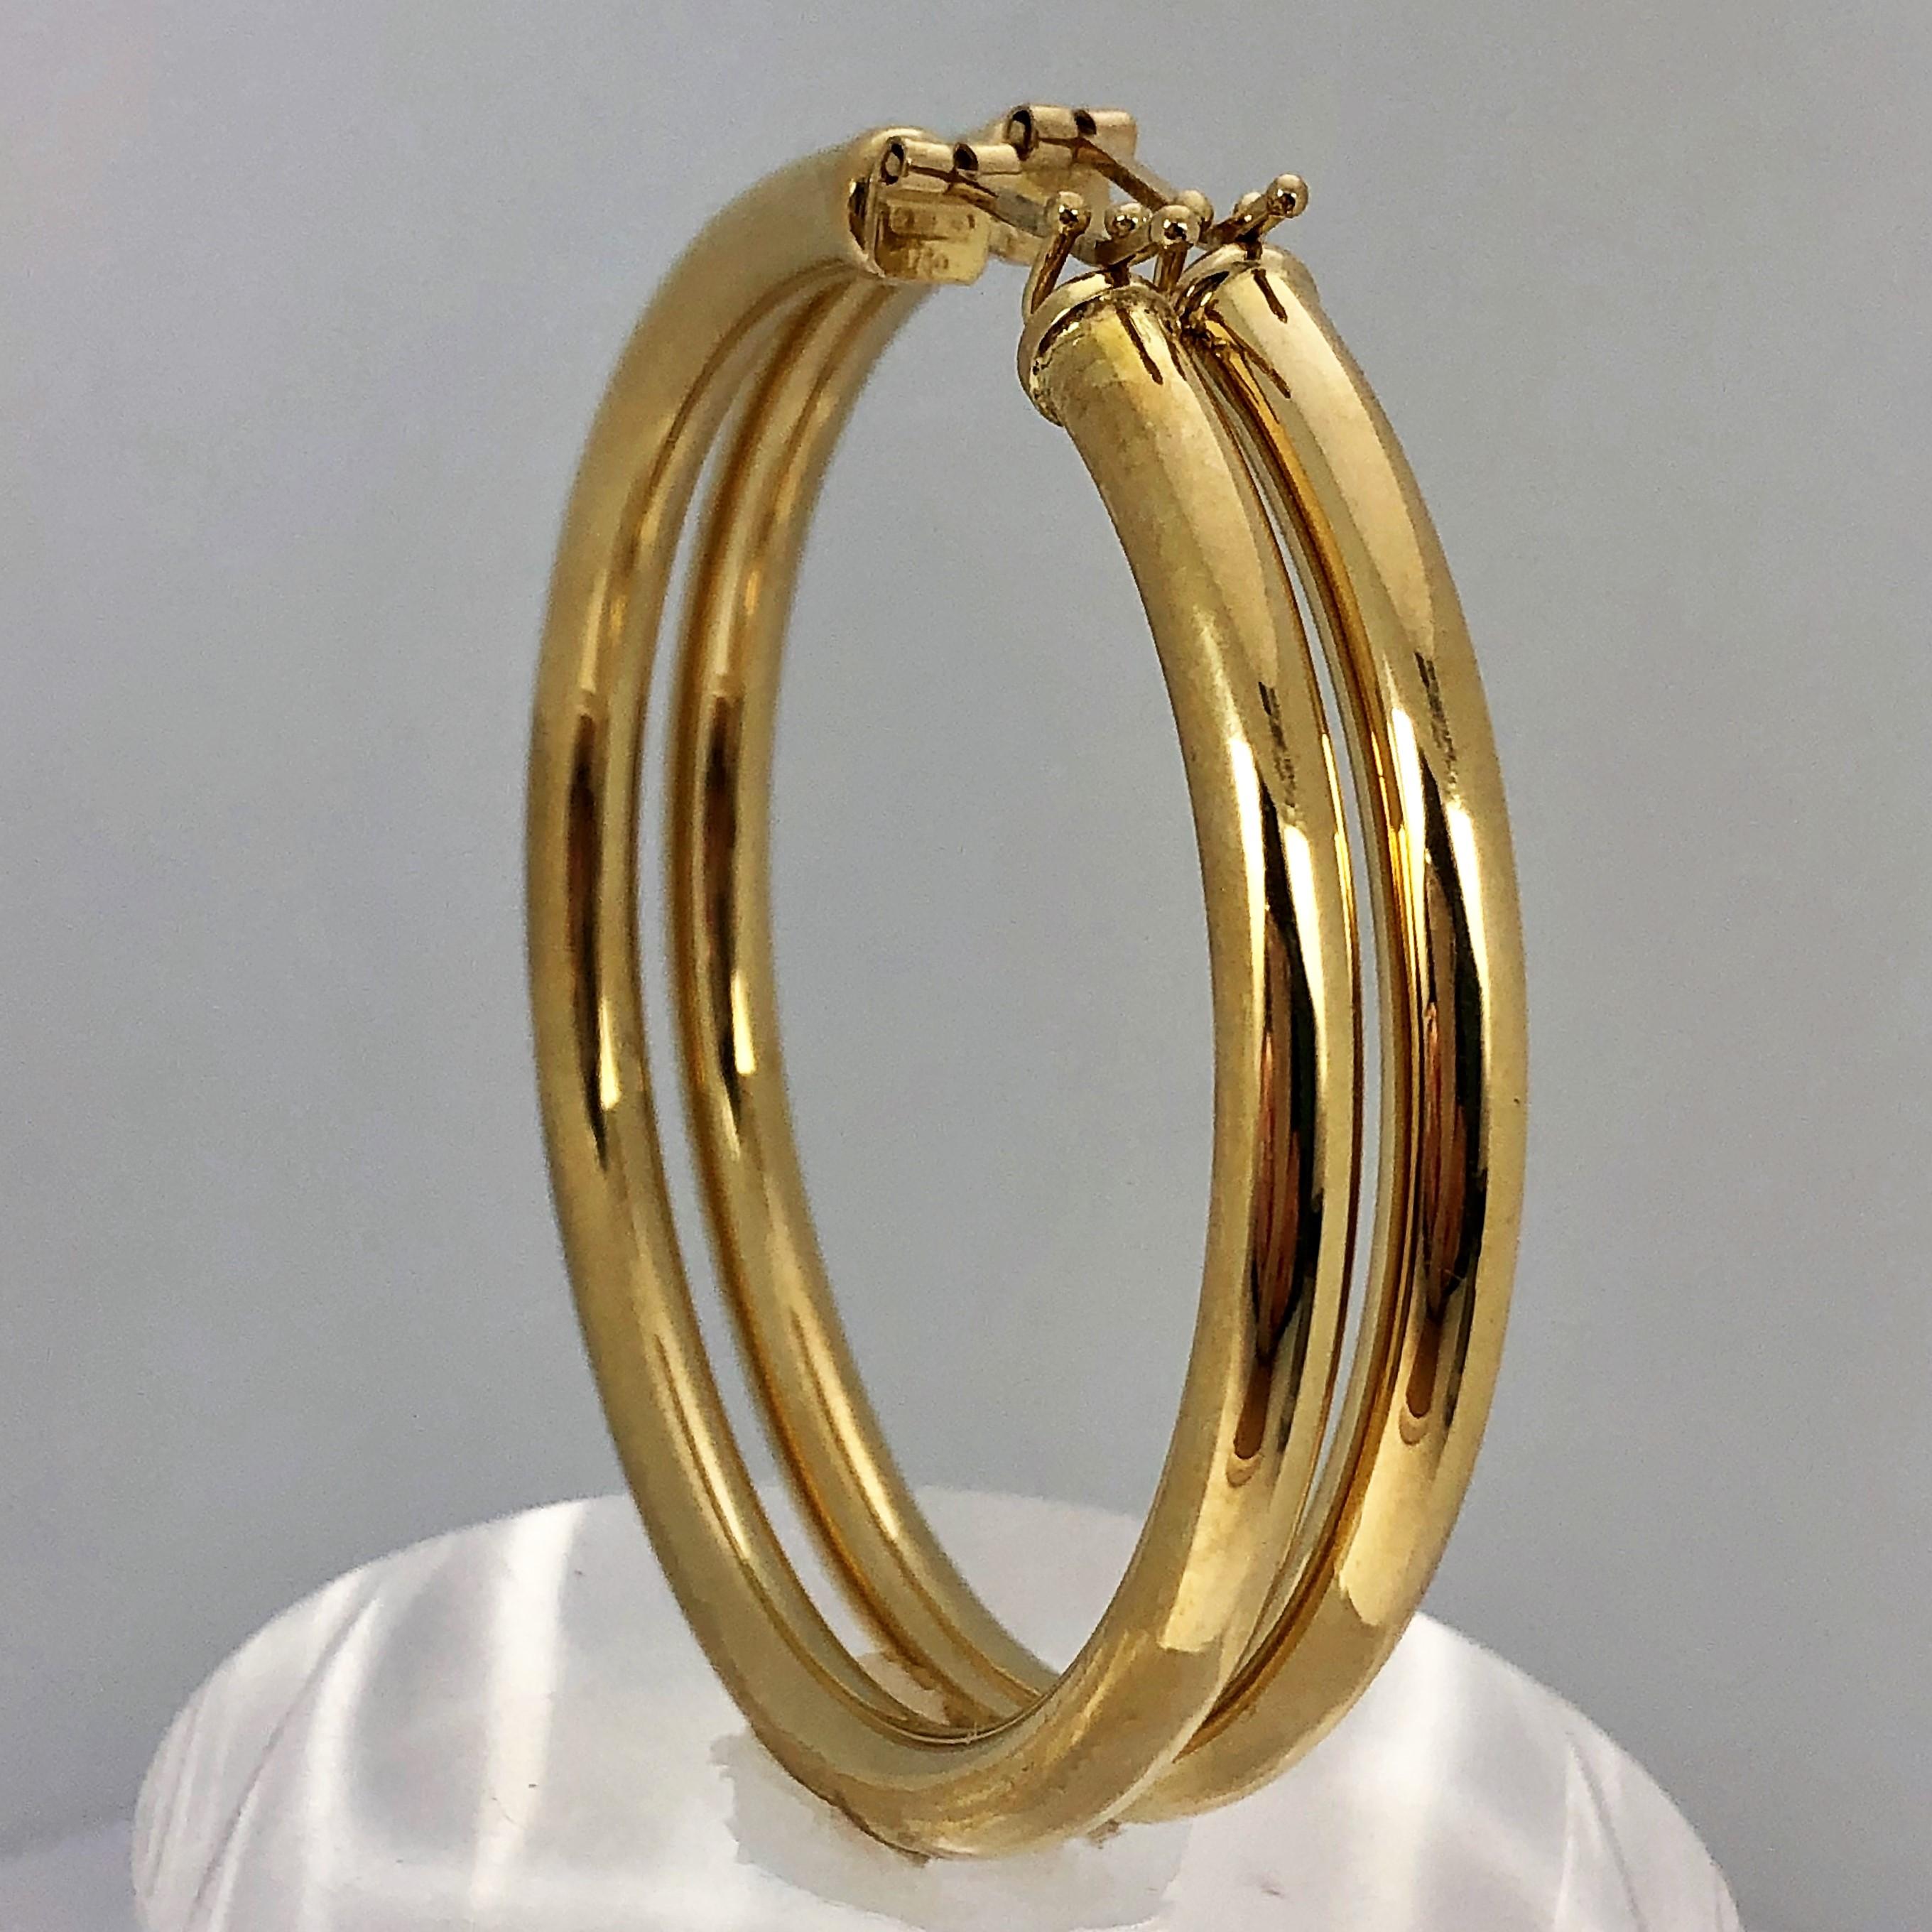 Made in Arezzo, Italy, these wonderful 2 1/16 inch diameter 18K Yellow Gold Hoops are a 
staple in any woman's jewelry collection. Easy to wear and lightweight, but not flimsy, like 
many of today's newly manufactured hoop earrings. Measuring 2 1/16